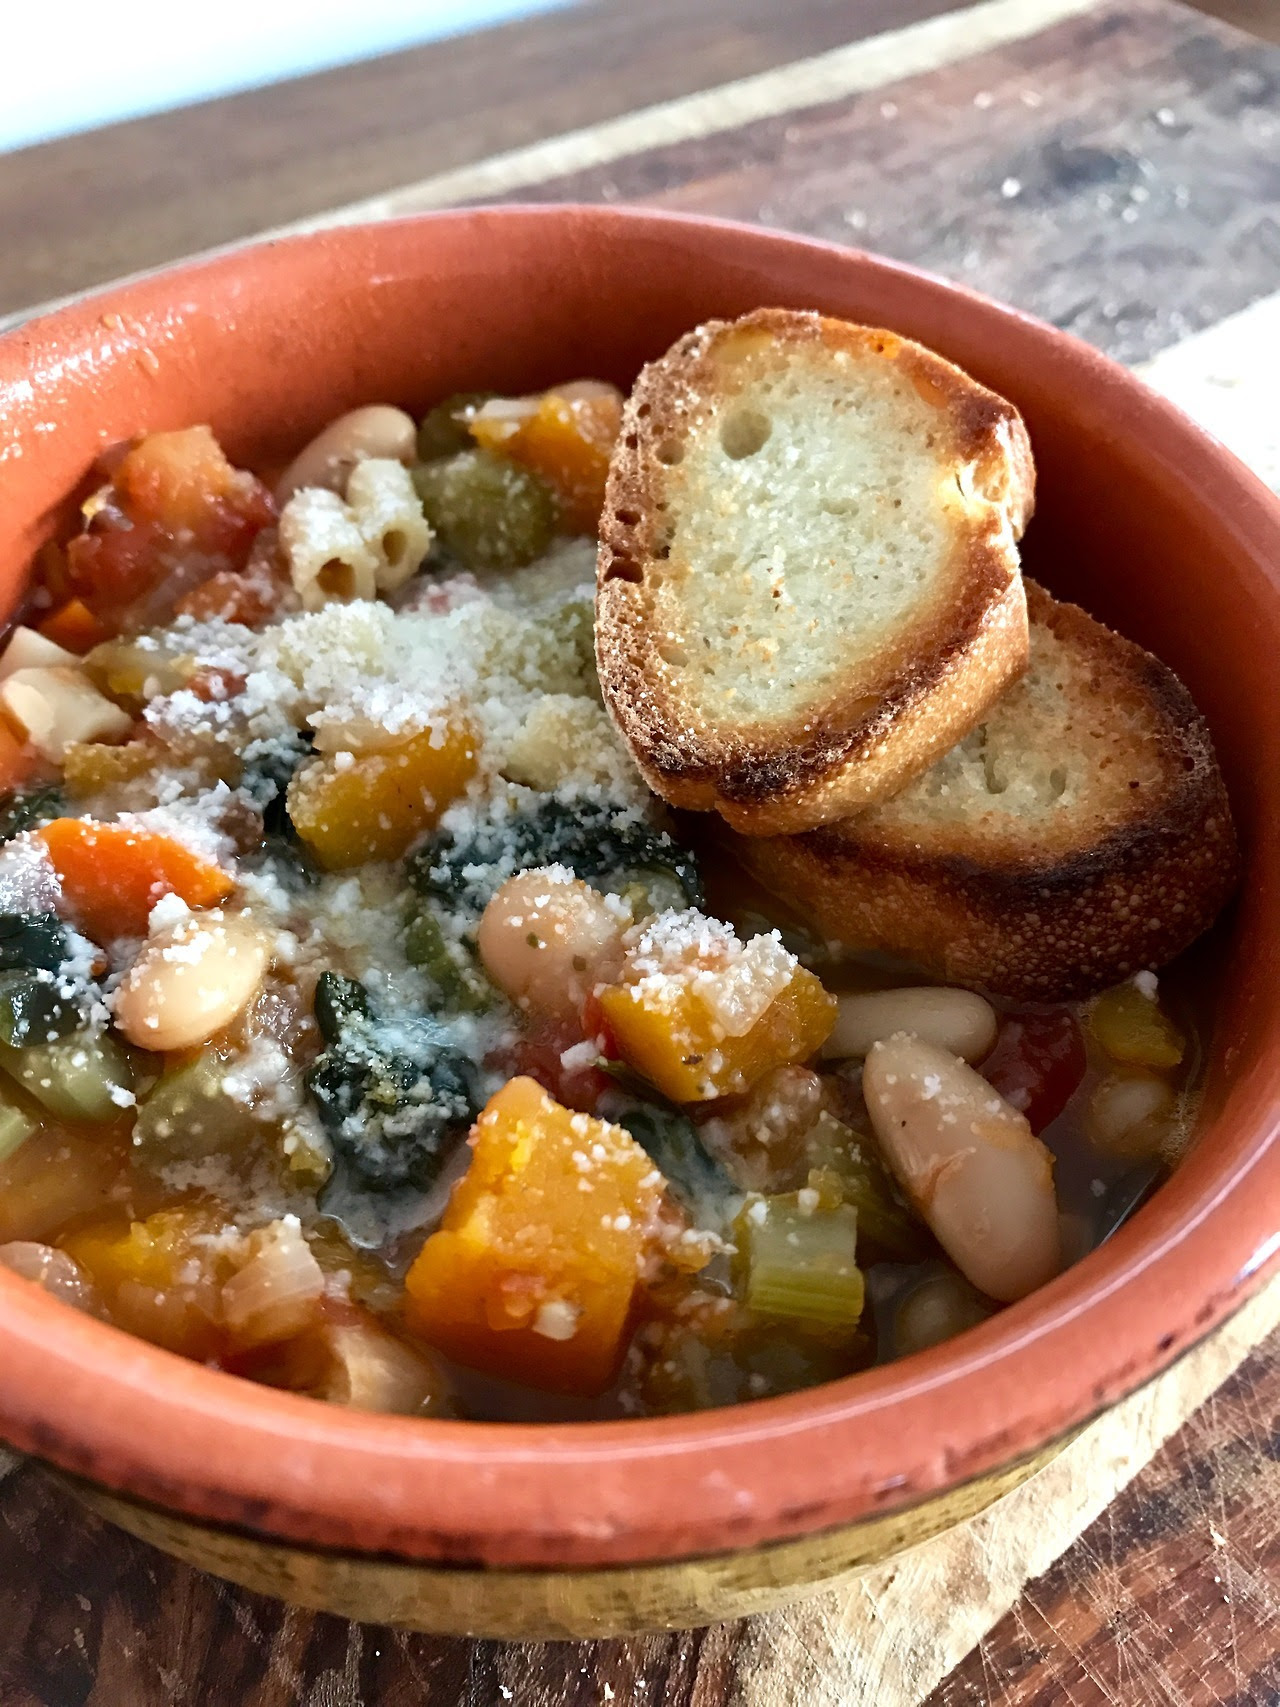 Pasta e FagioliLately, I’ve been looking back at some of my old posts from when I started this blog and it makes me chuckle to see how much I really love soup. Does everyone else feel this way, or is it just me? Loving soup, I mean. I can’t seem to...